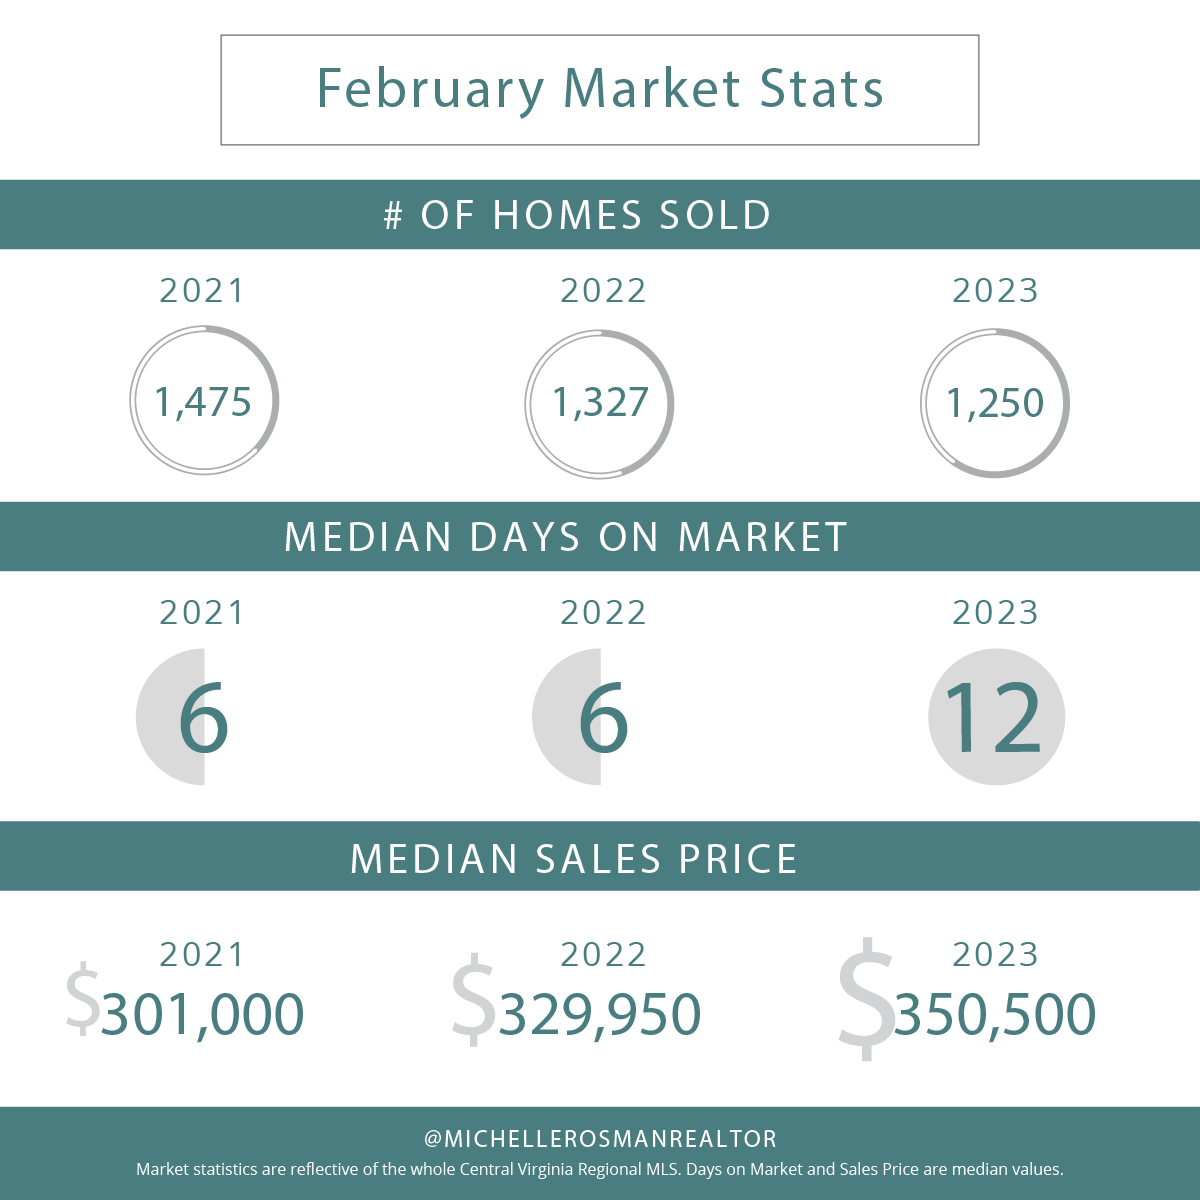 February 2023 market stats infographic